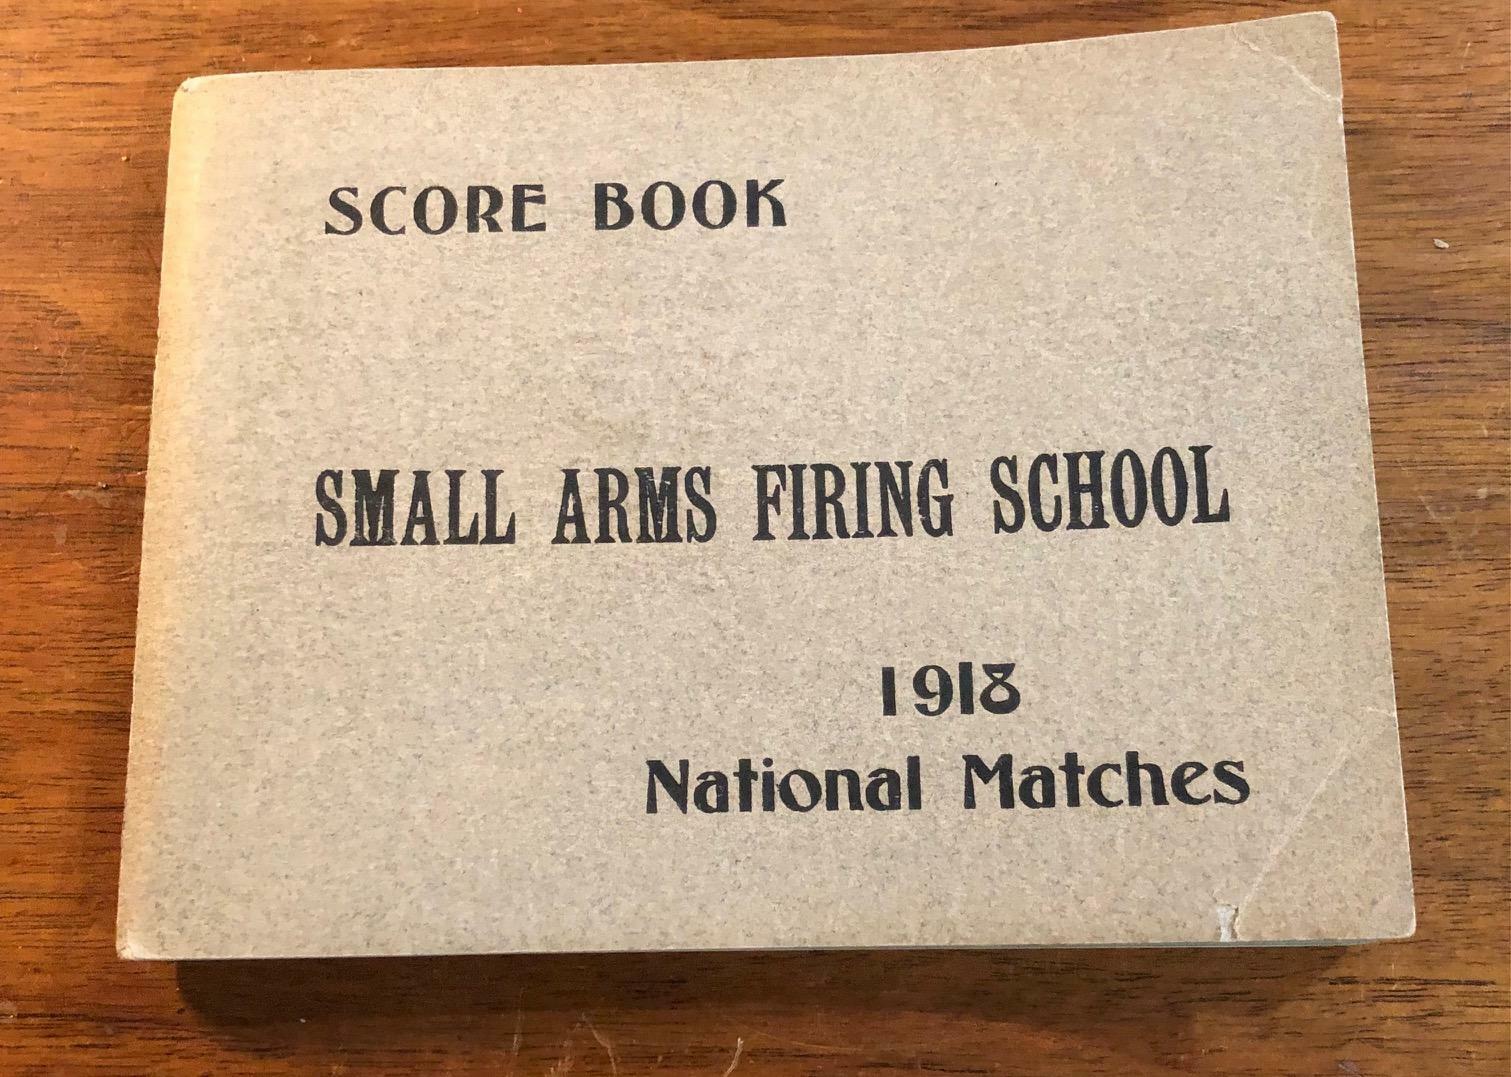 Original 1913 Small Arms Firing School National Matches Score Book US Army WWI